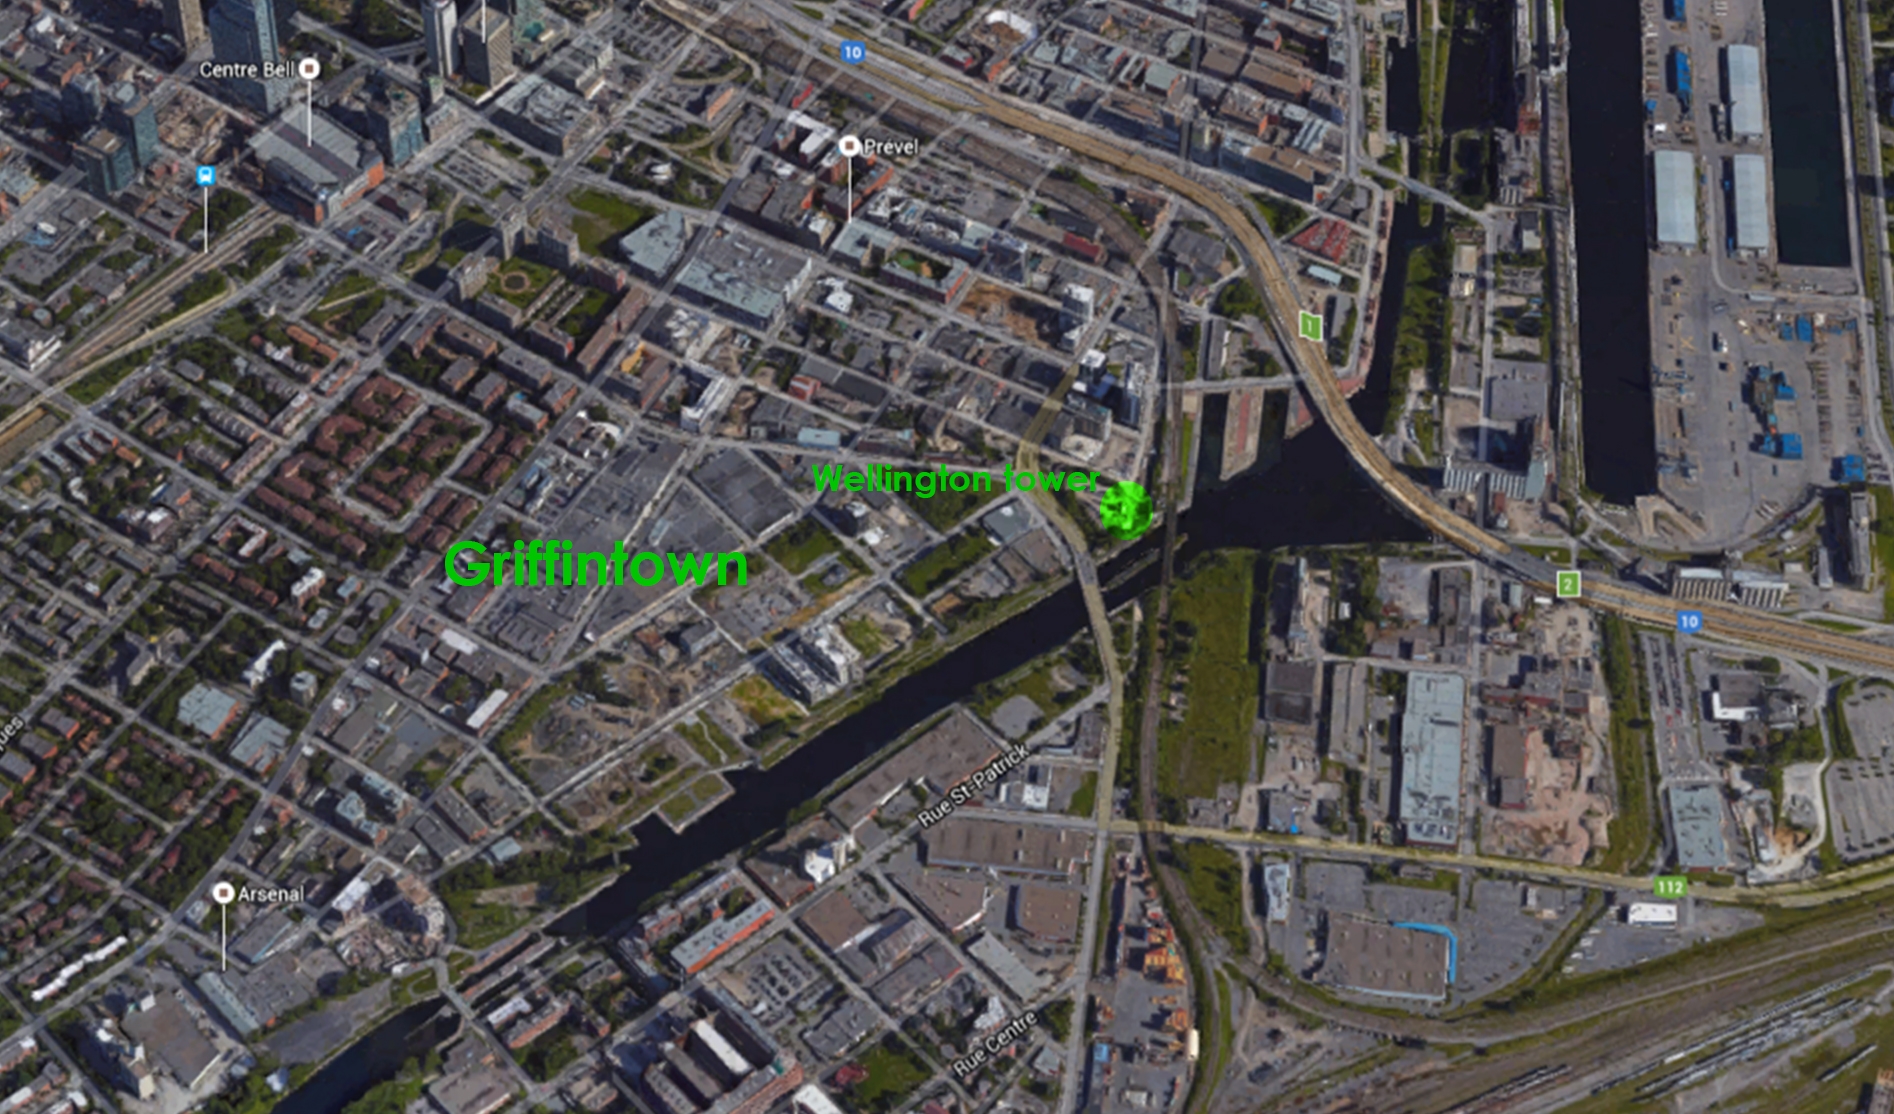 [Image 4 - Aerial view showing Griffintown in 2015. Source: Google maps]